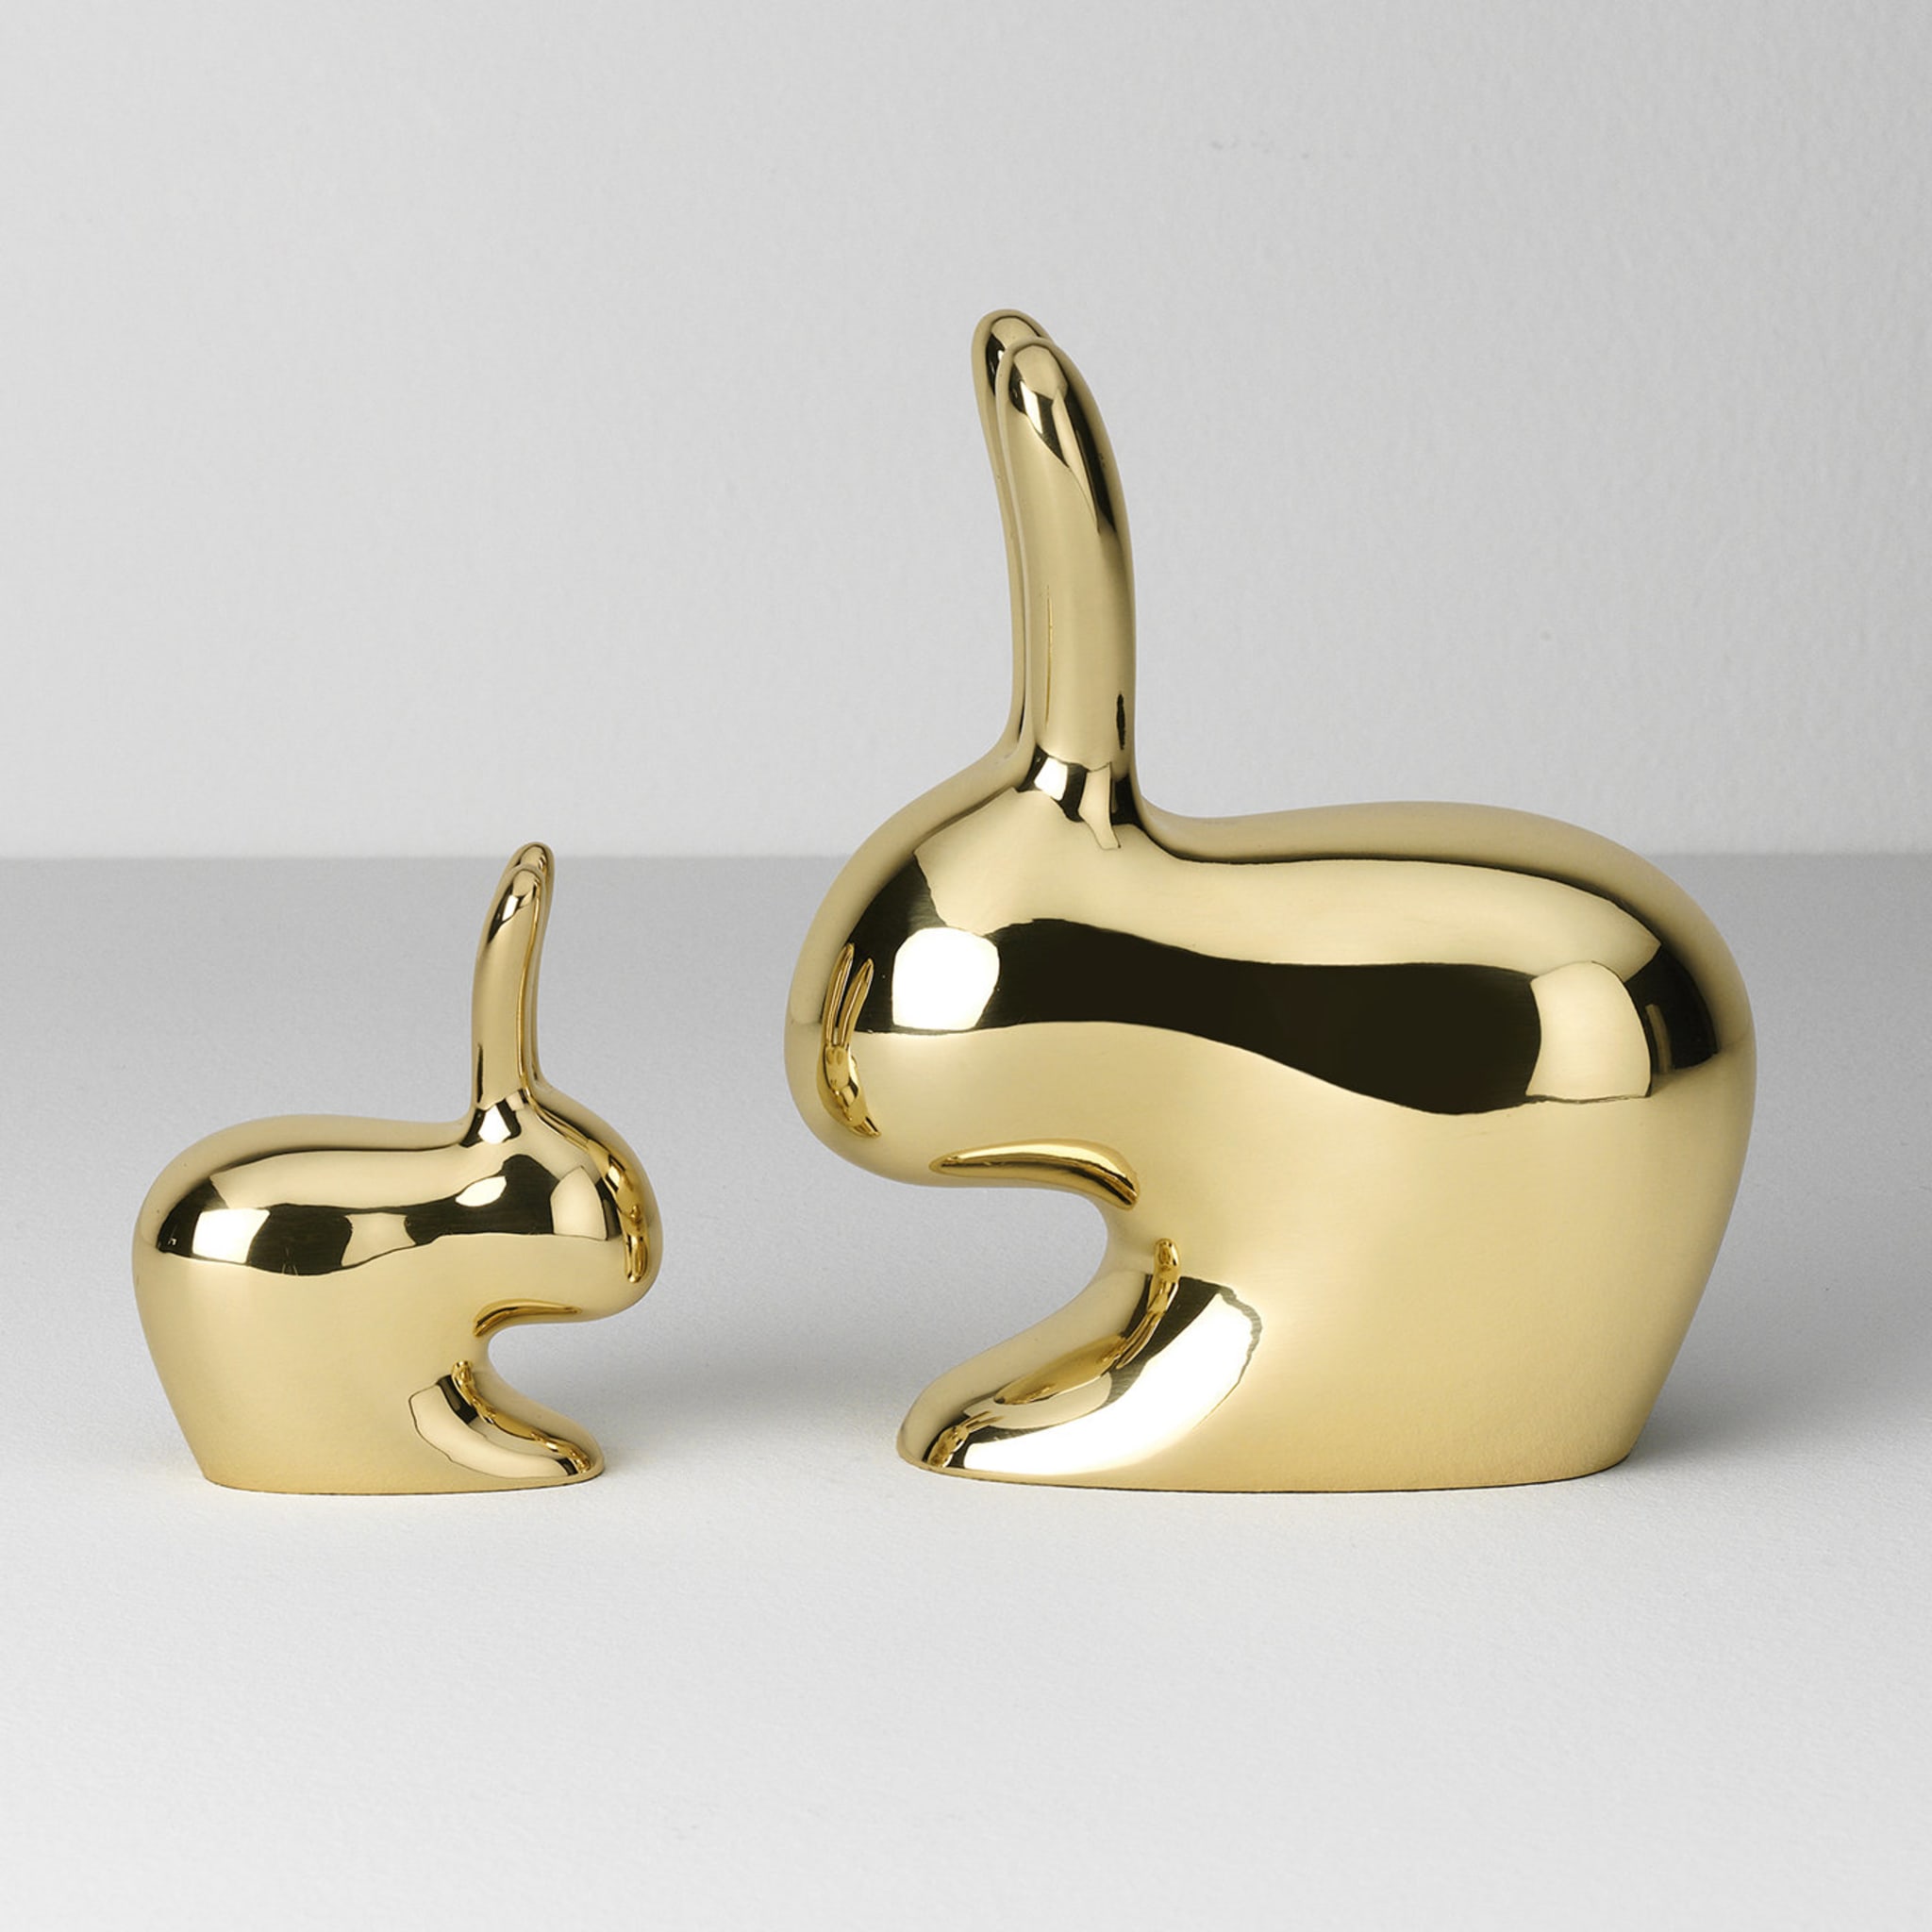 Rabbit Doorstop in Polished Brass by Stefano Giovannoni - Alternative view 5